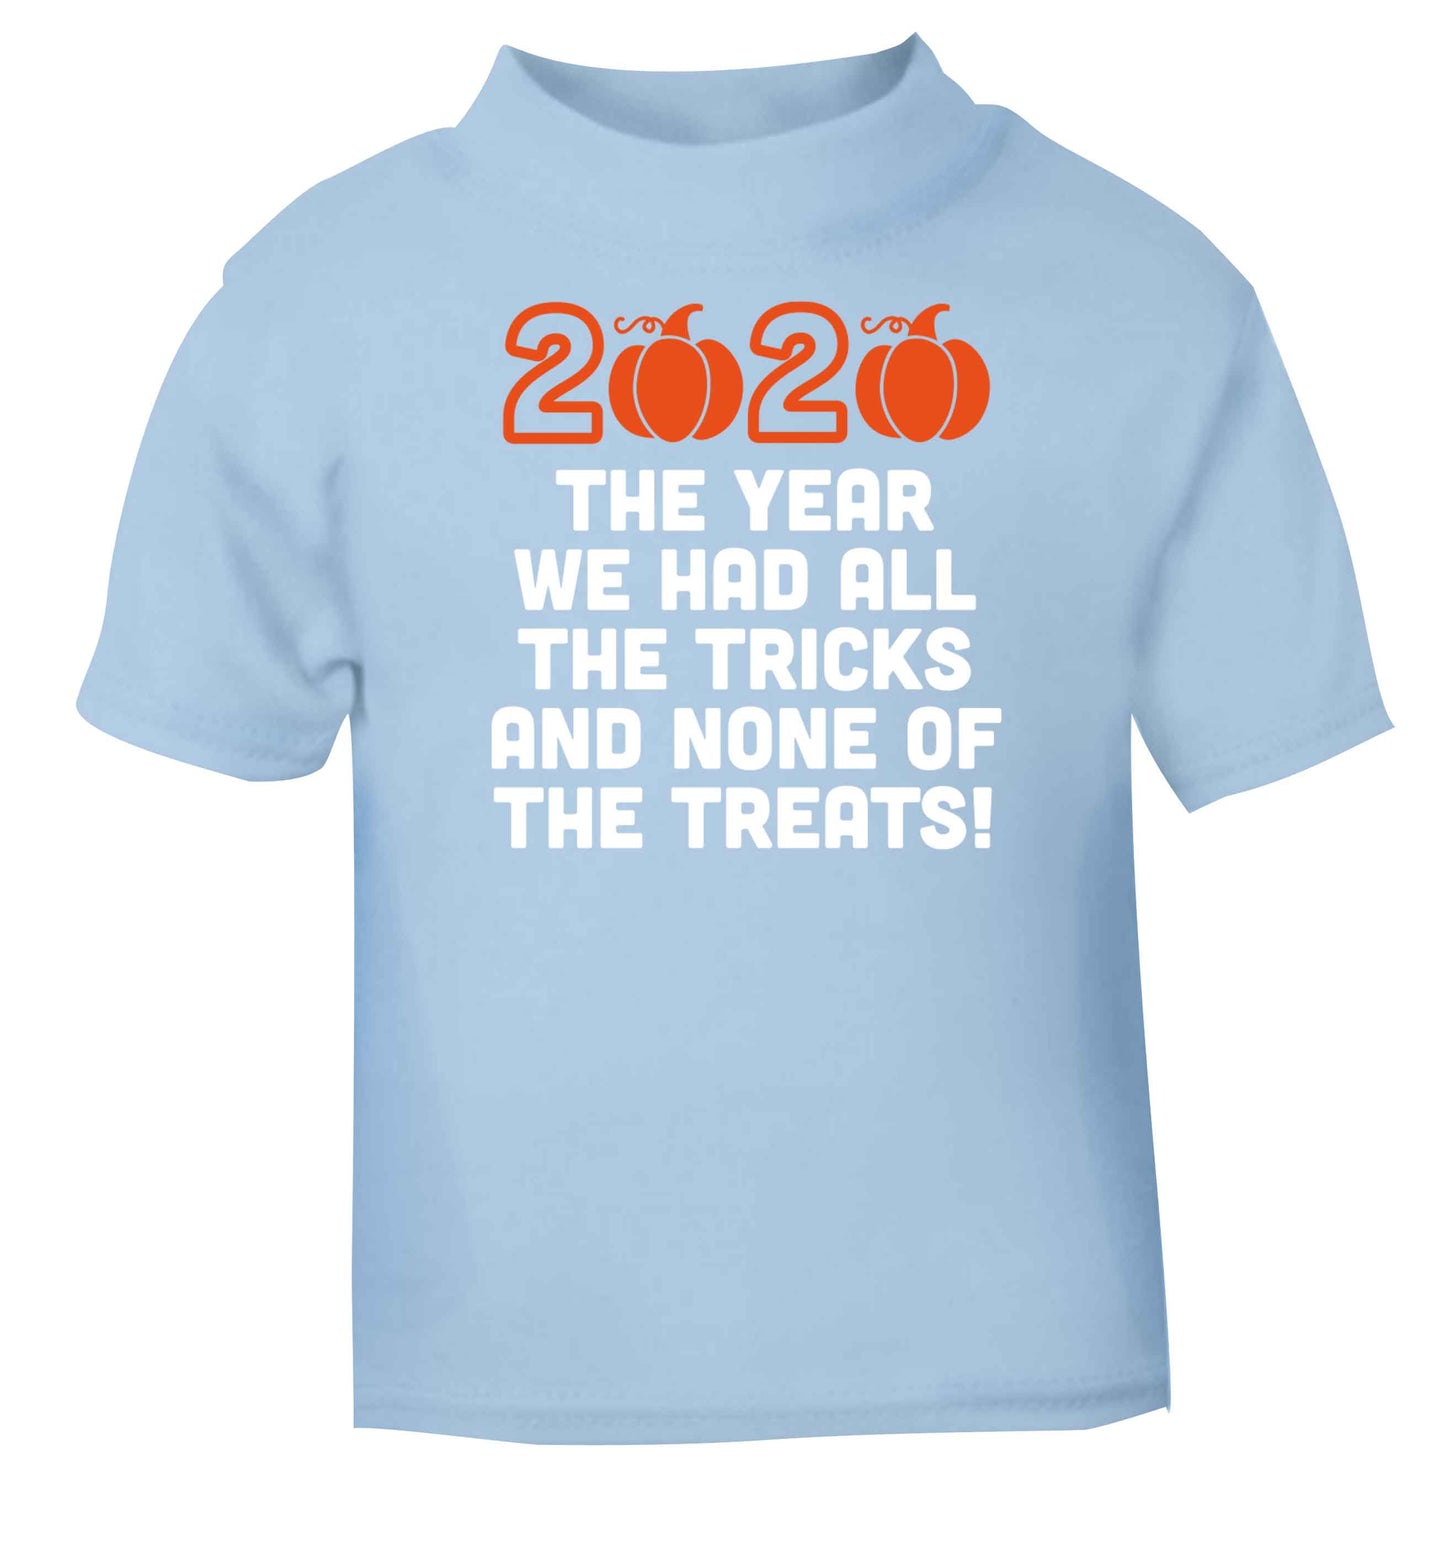 2020 The year we had all of the tricks and none of the treats light blue baby toddler Tshirt 2 Years